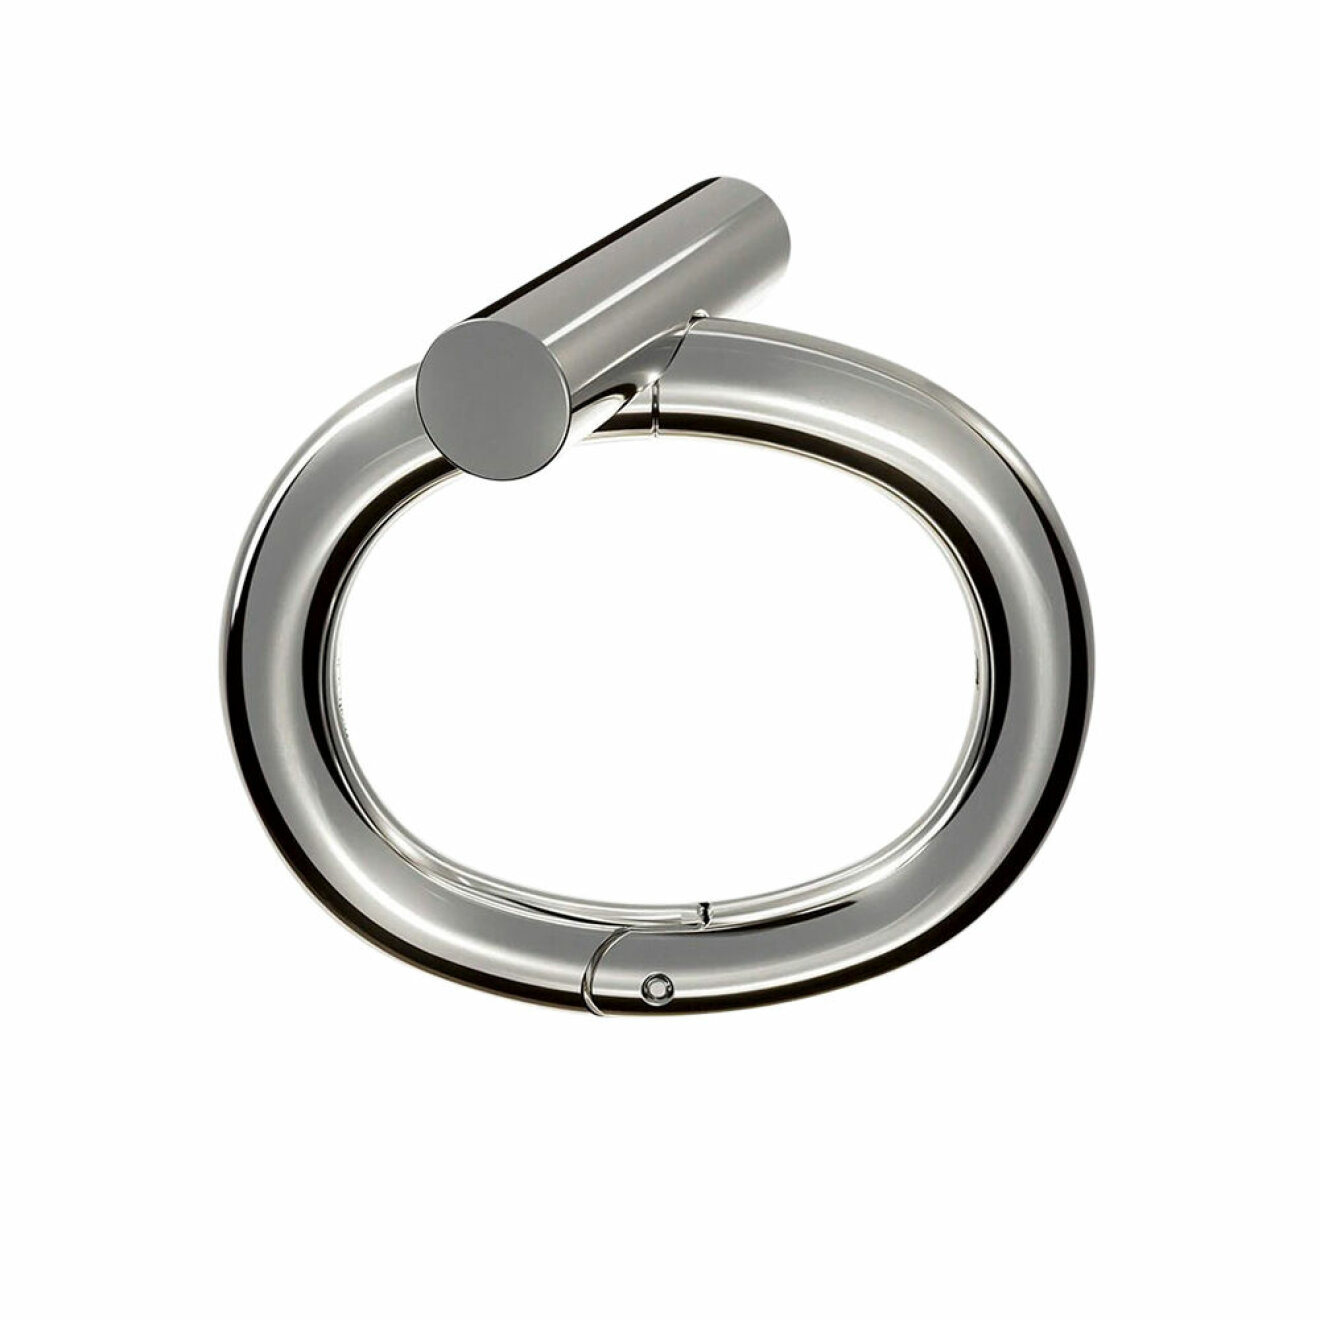 Silver­armband, 6 300  kr, David Andersson Jewelry.